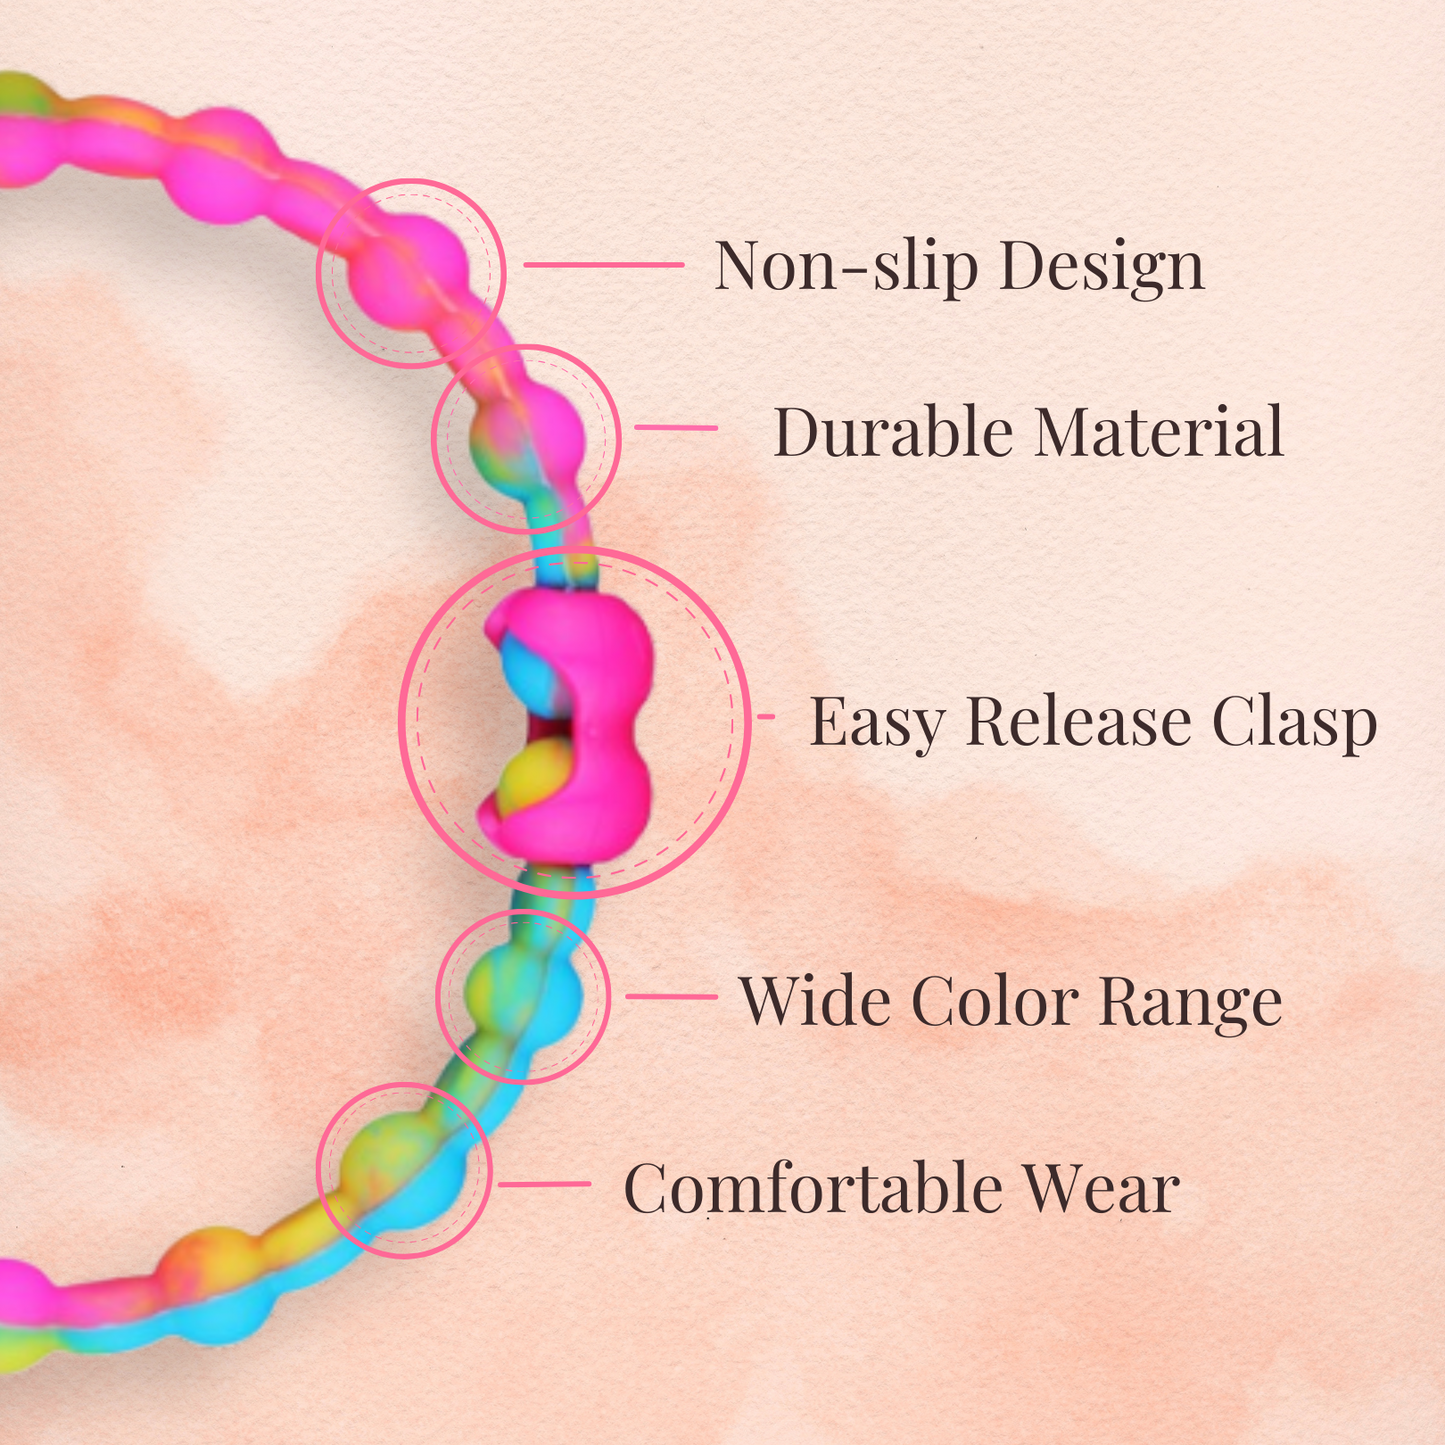 Whispering Winds Pack PRO Hair Ties (4-Pack): Capture the Essence of a Breezy Day